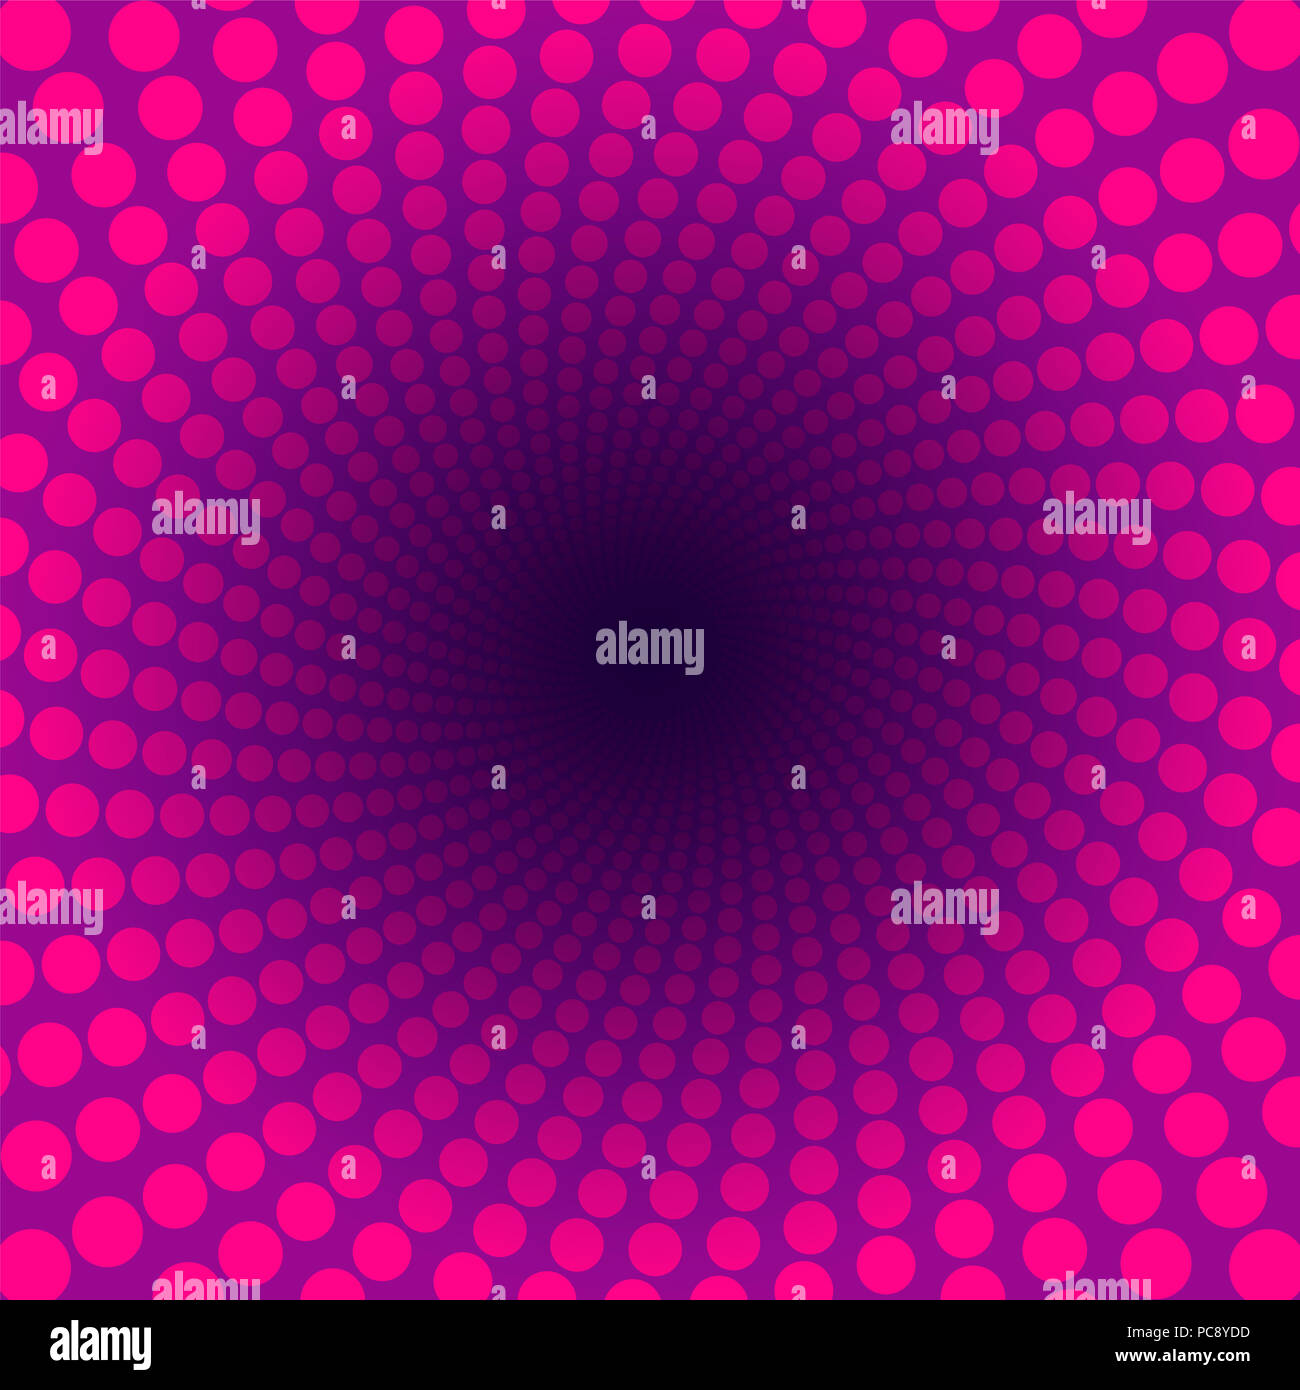 Spiral pattern of pink dots in a purple tunnel with dark center. Happy girl power illustration. Stock Photo